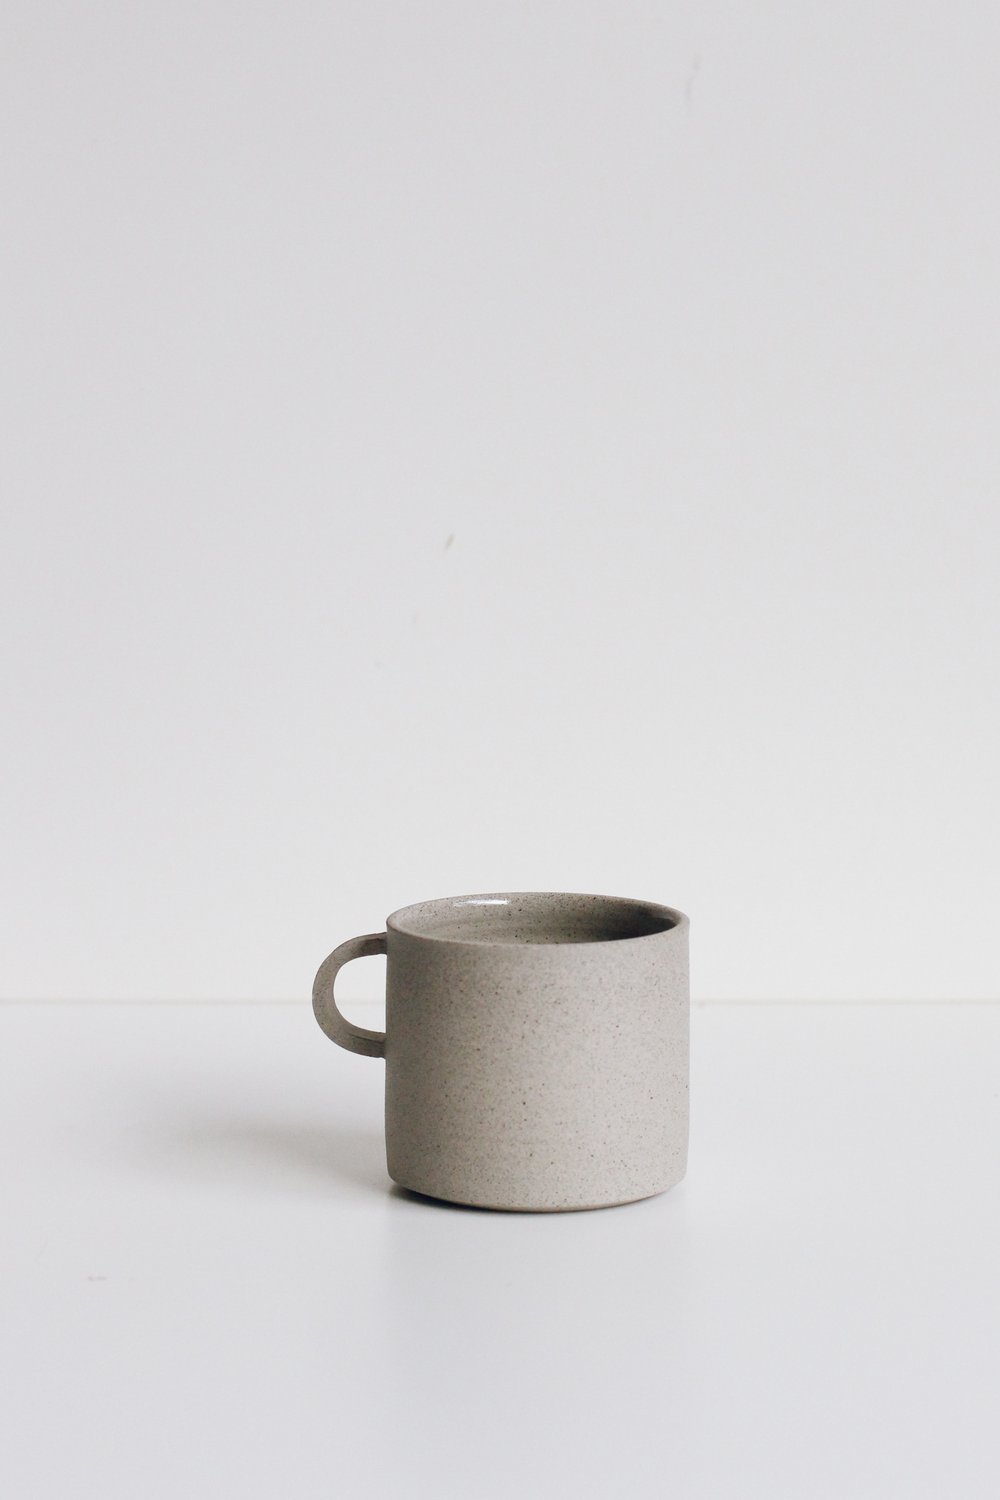 Image of Cup / Various Shades